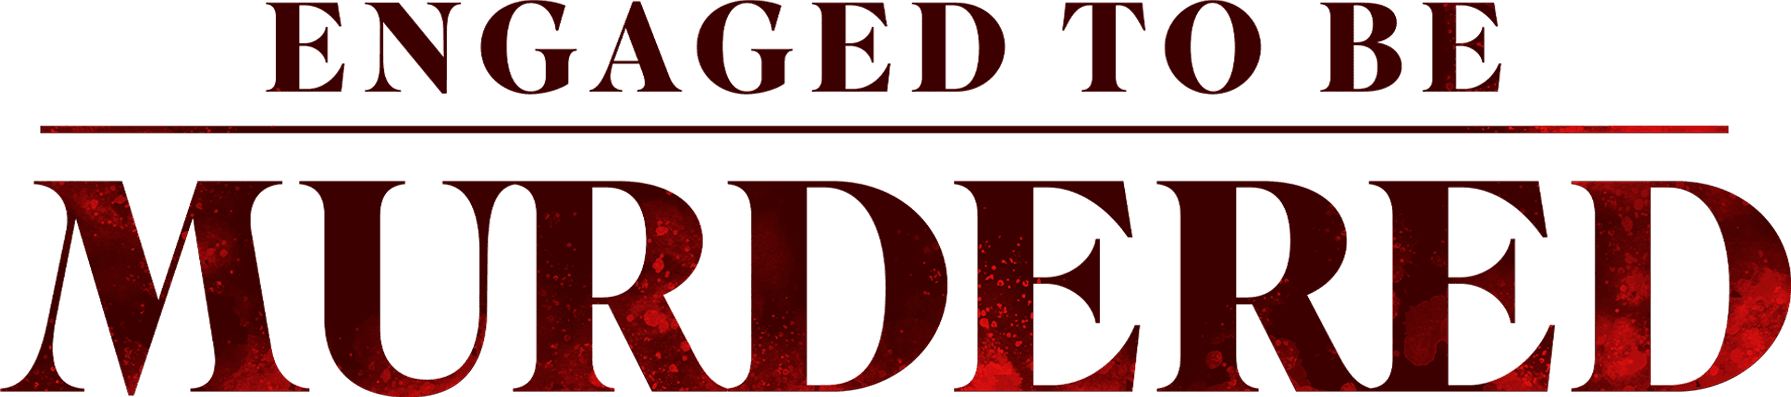 Engaged to be Murdered logo